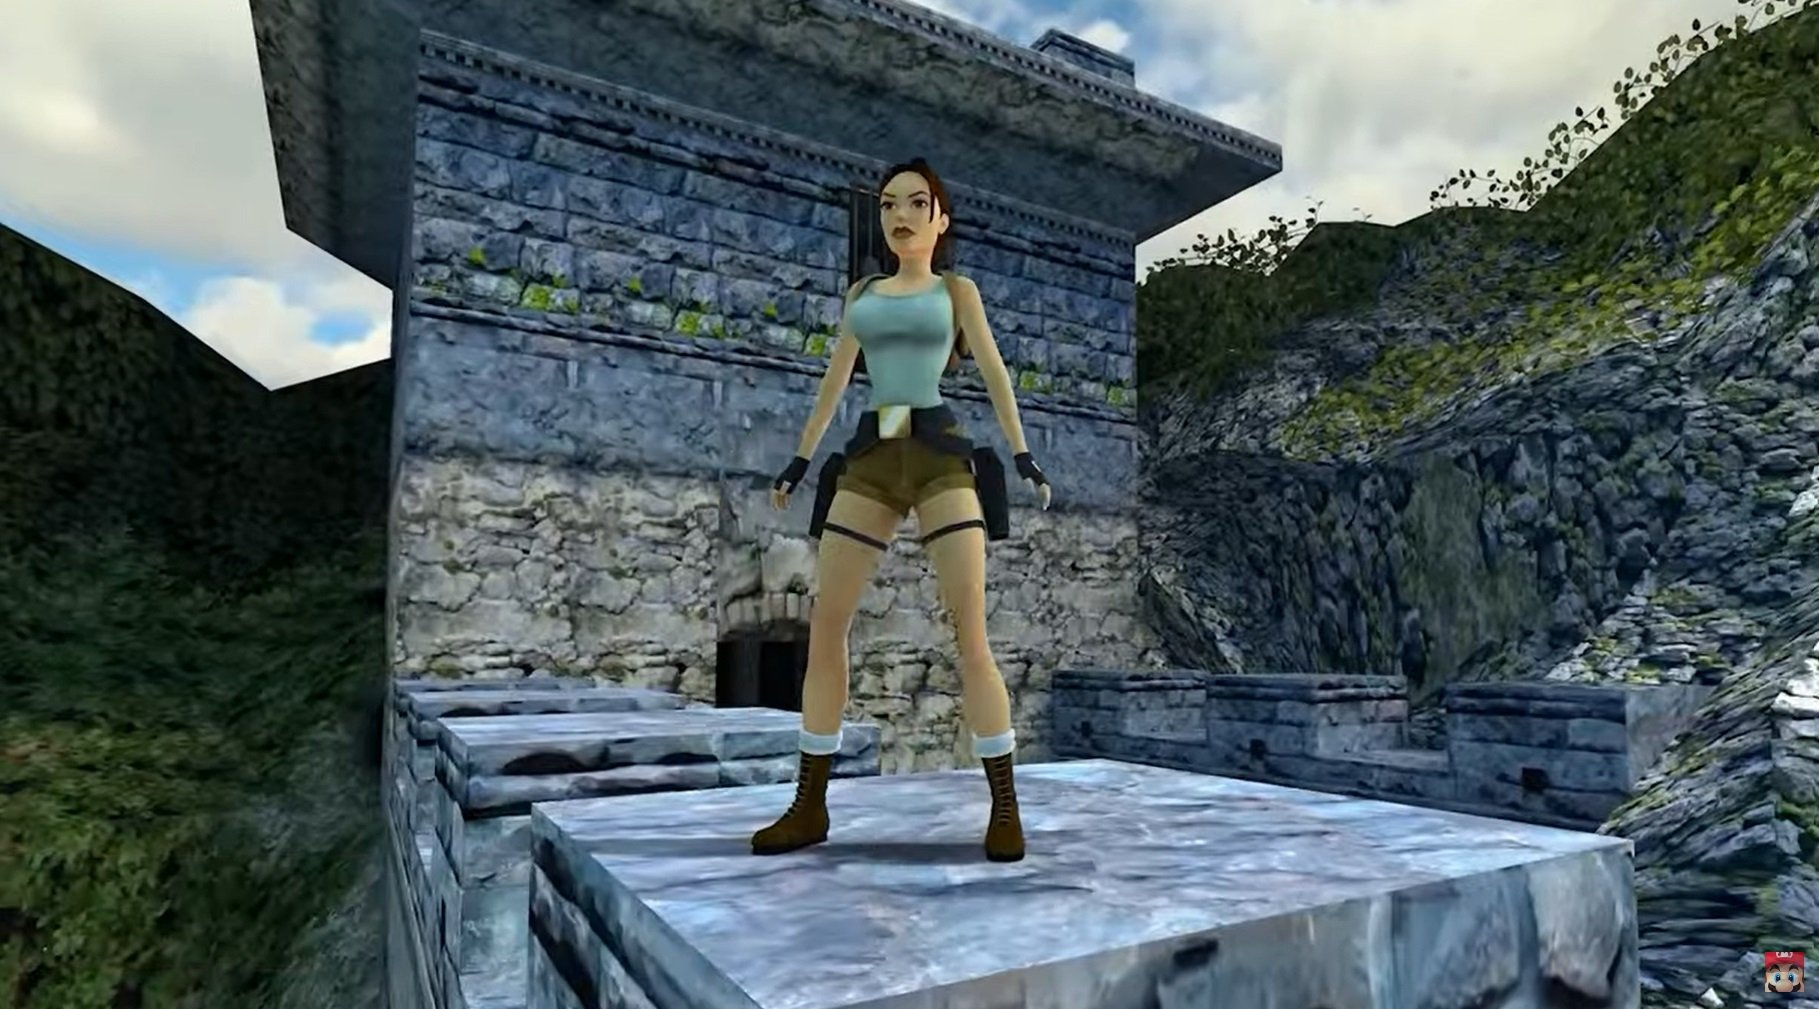 Tomb Raider 1-3 Remastered has a warning about racial and ethnic